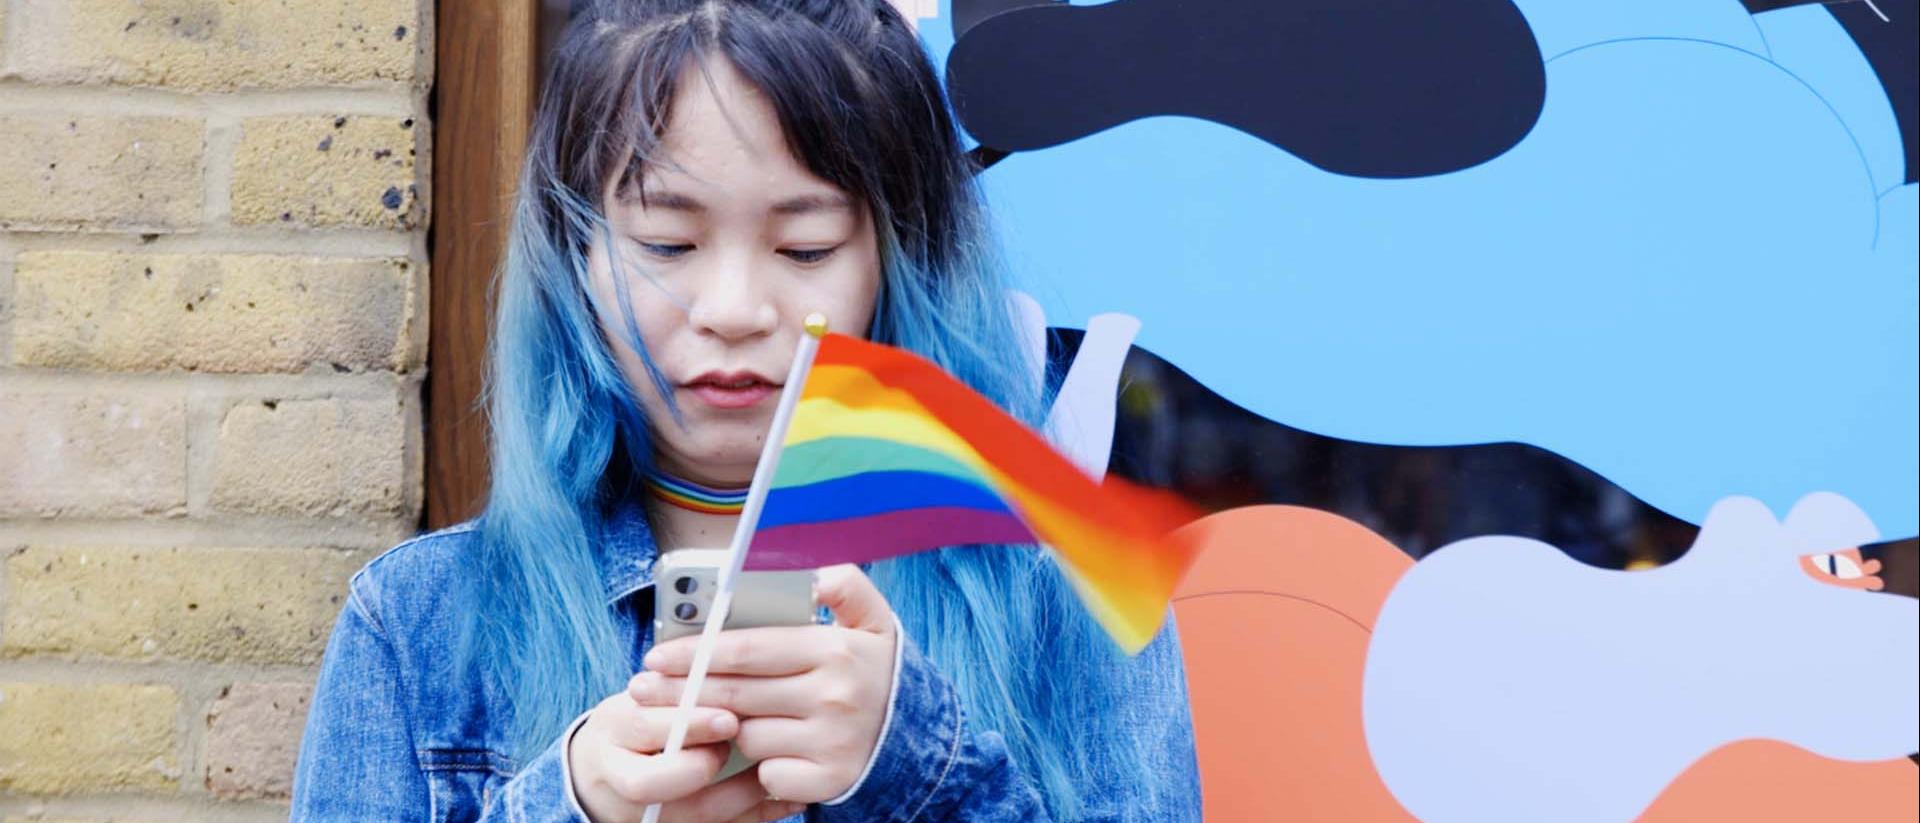 a photo of a person standing outside looking at their phone wile holding a small rainbow flag